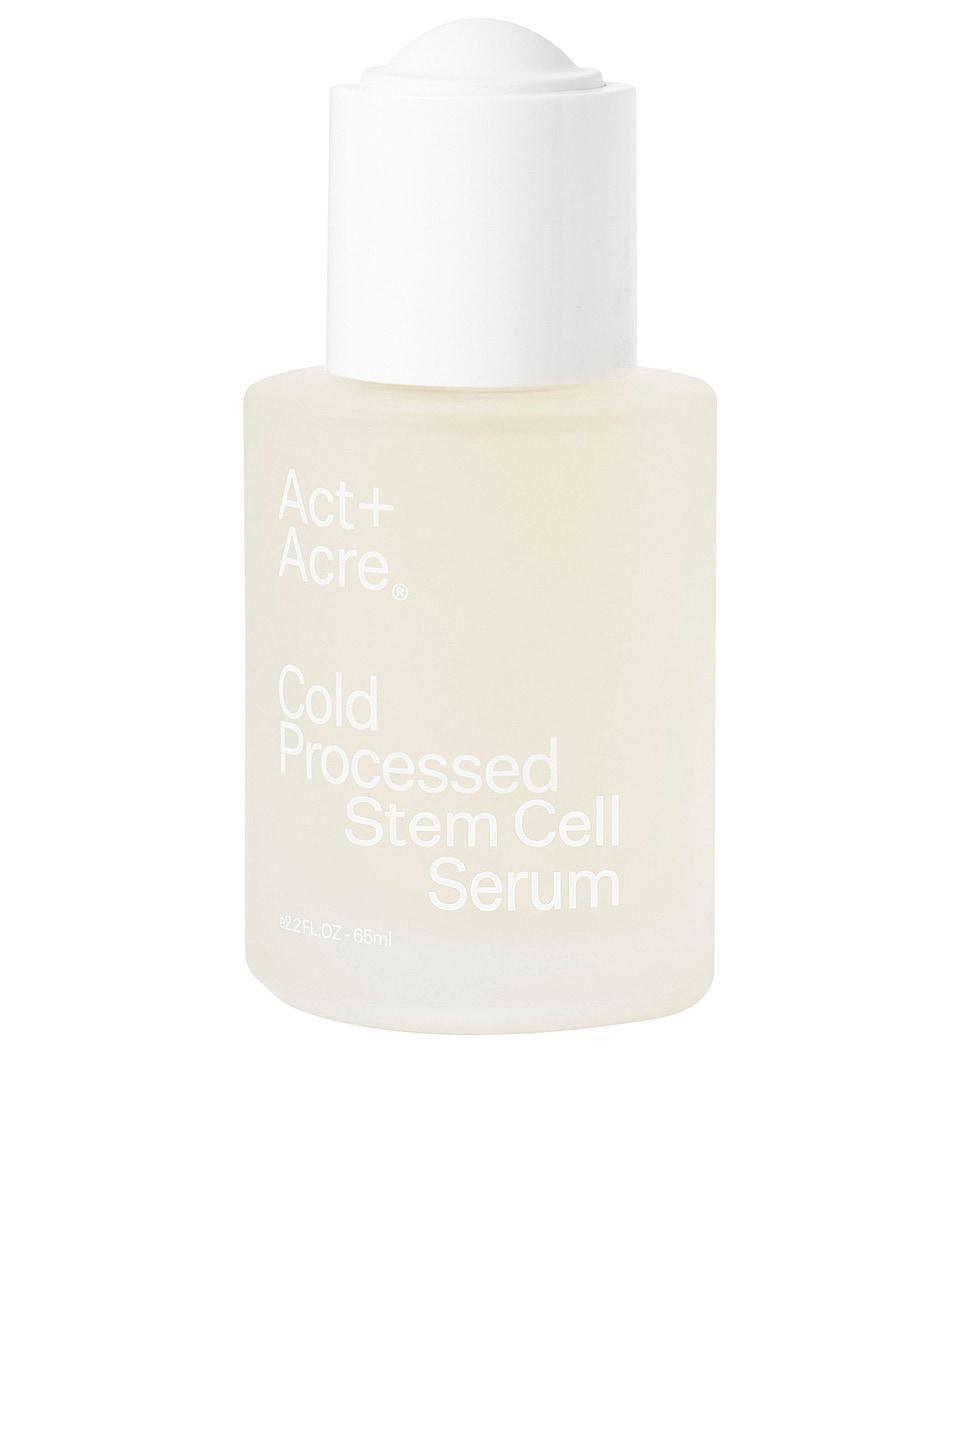 Act Acre stem cell serum